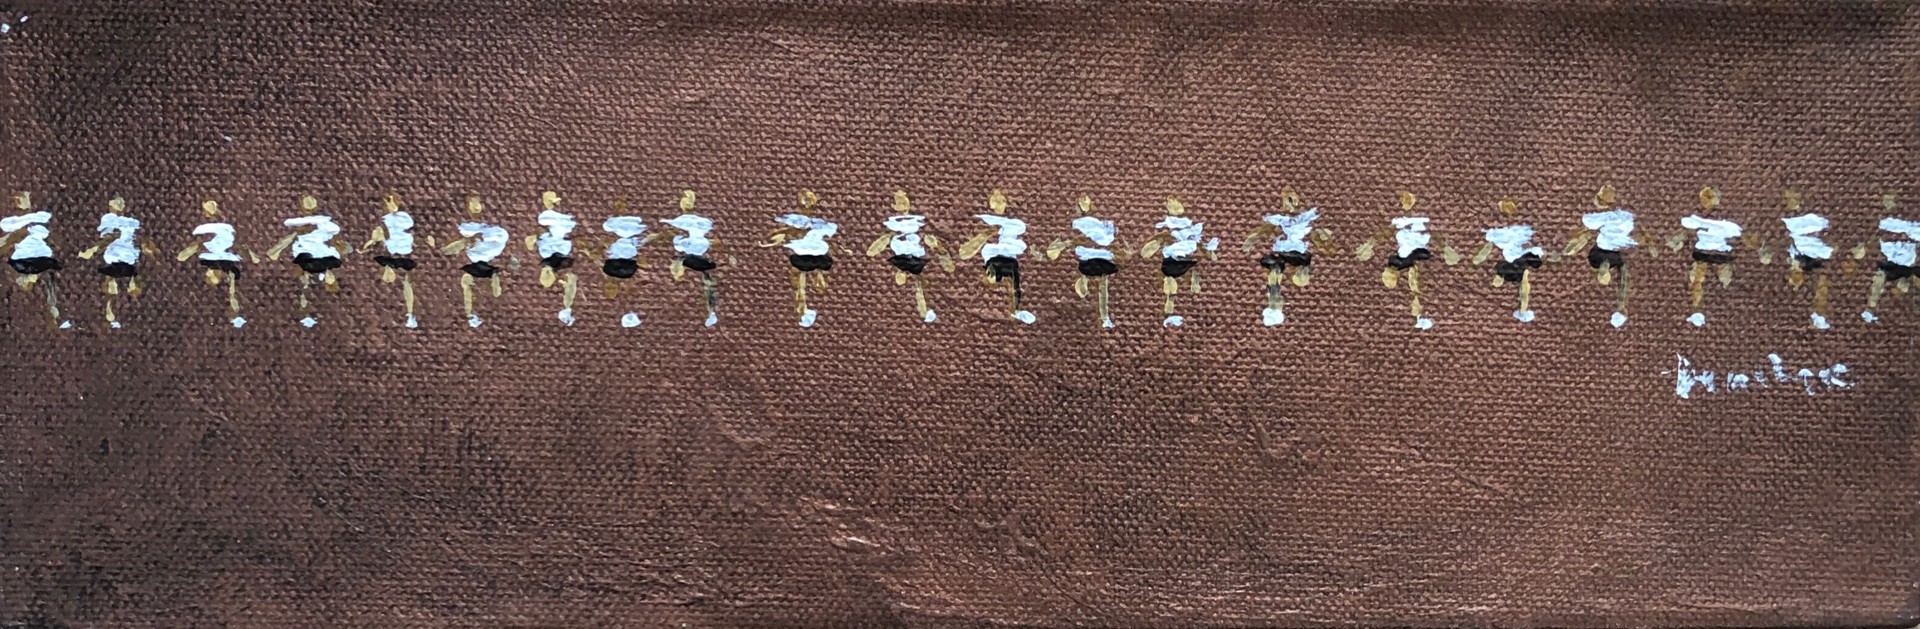 Runners on Copper by Heather Blanton